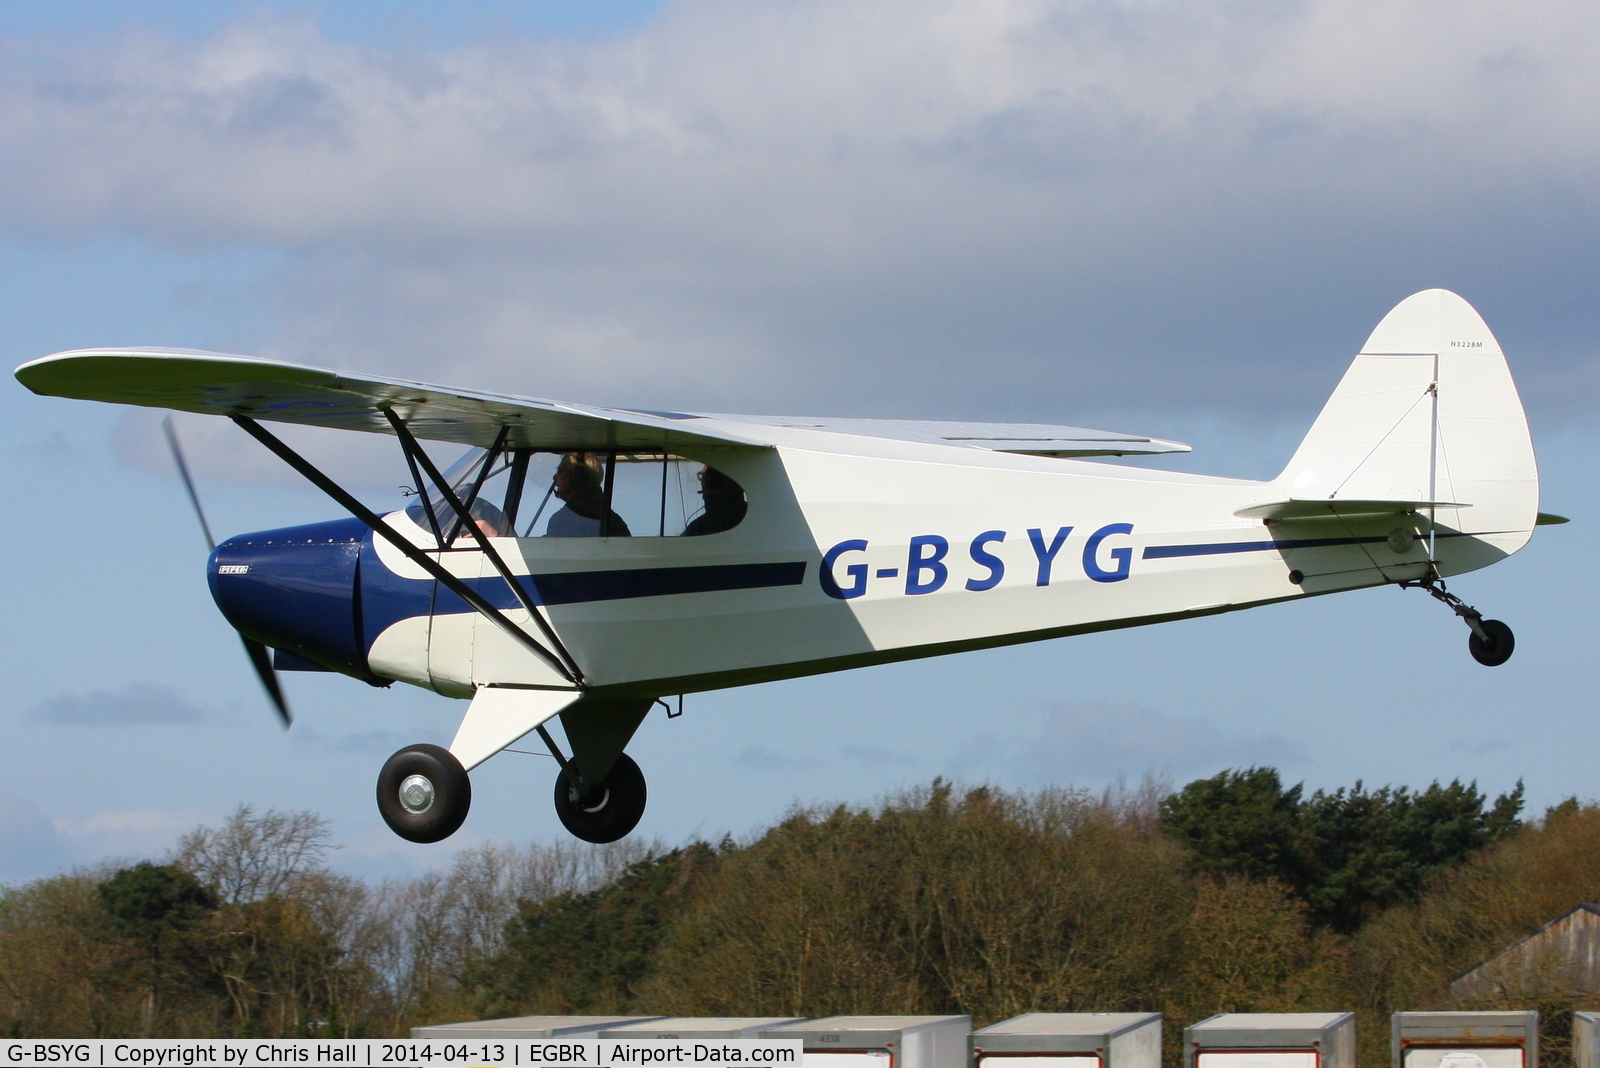 G-BSYG, 1947 Piper PA-12 Super Cruiser C/N 12-2106, at Breighton's 'Early Bird' Fly-in 13/04/14